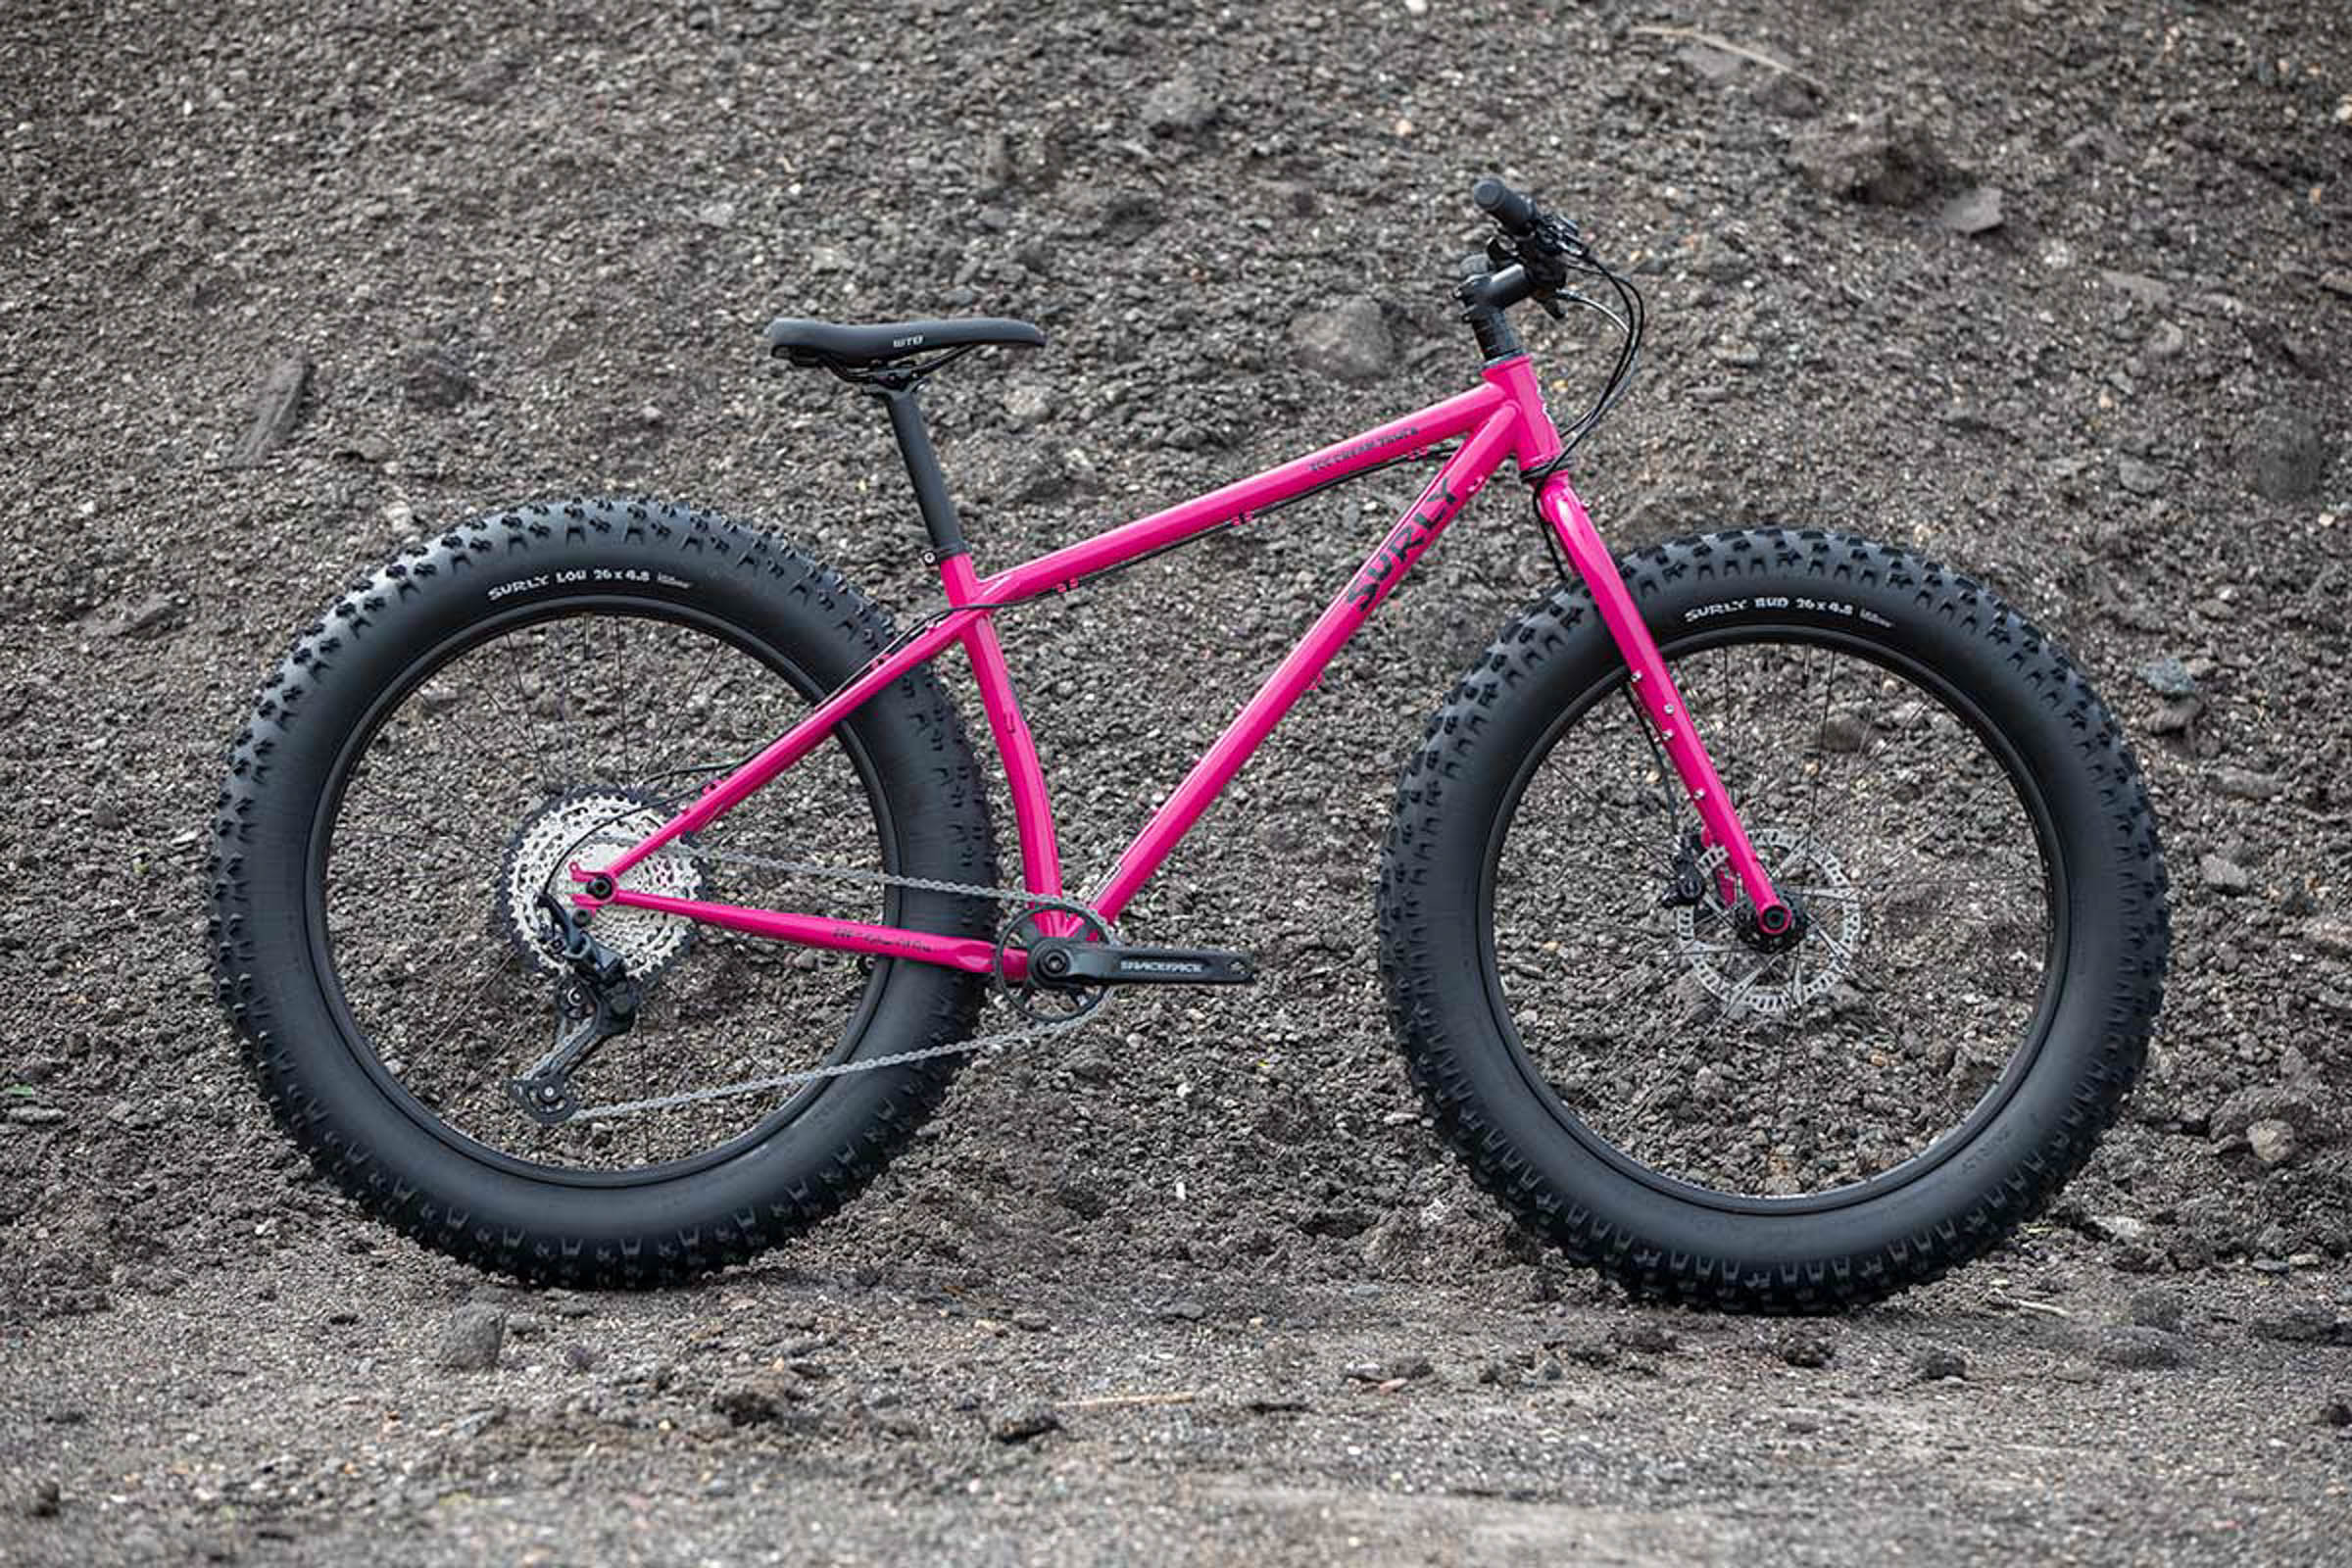 New Surly Ice Cream Truck in Prickly Pear Sparkle - BIKEPACKING.com